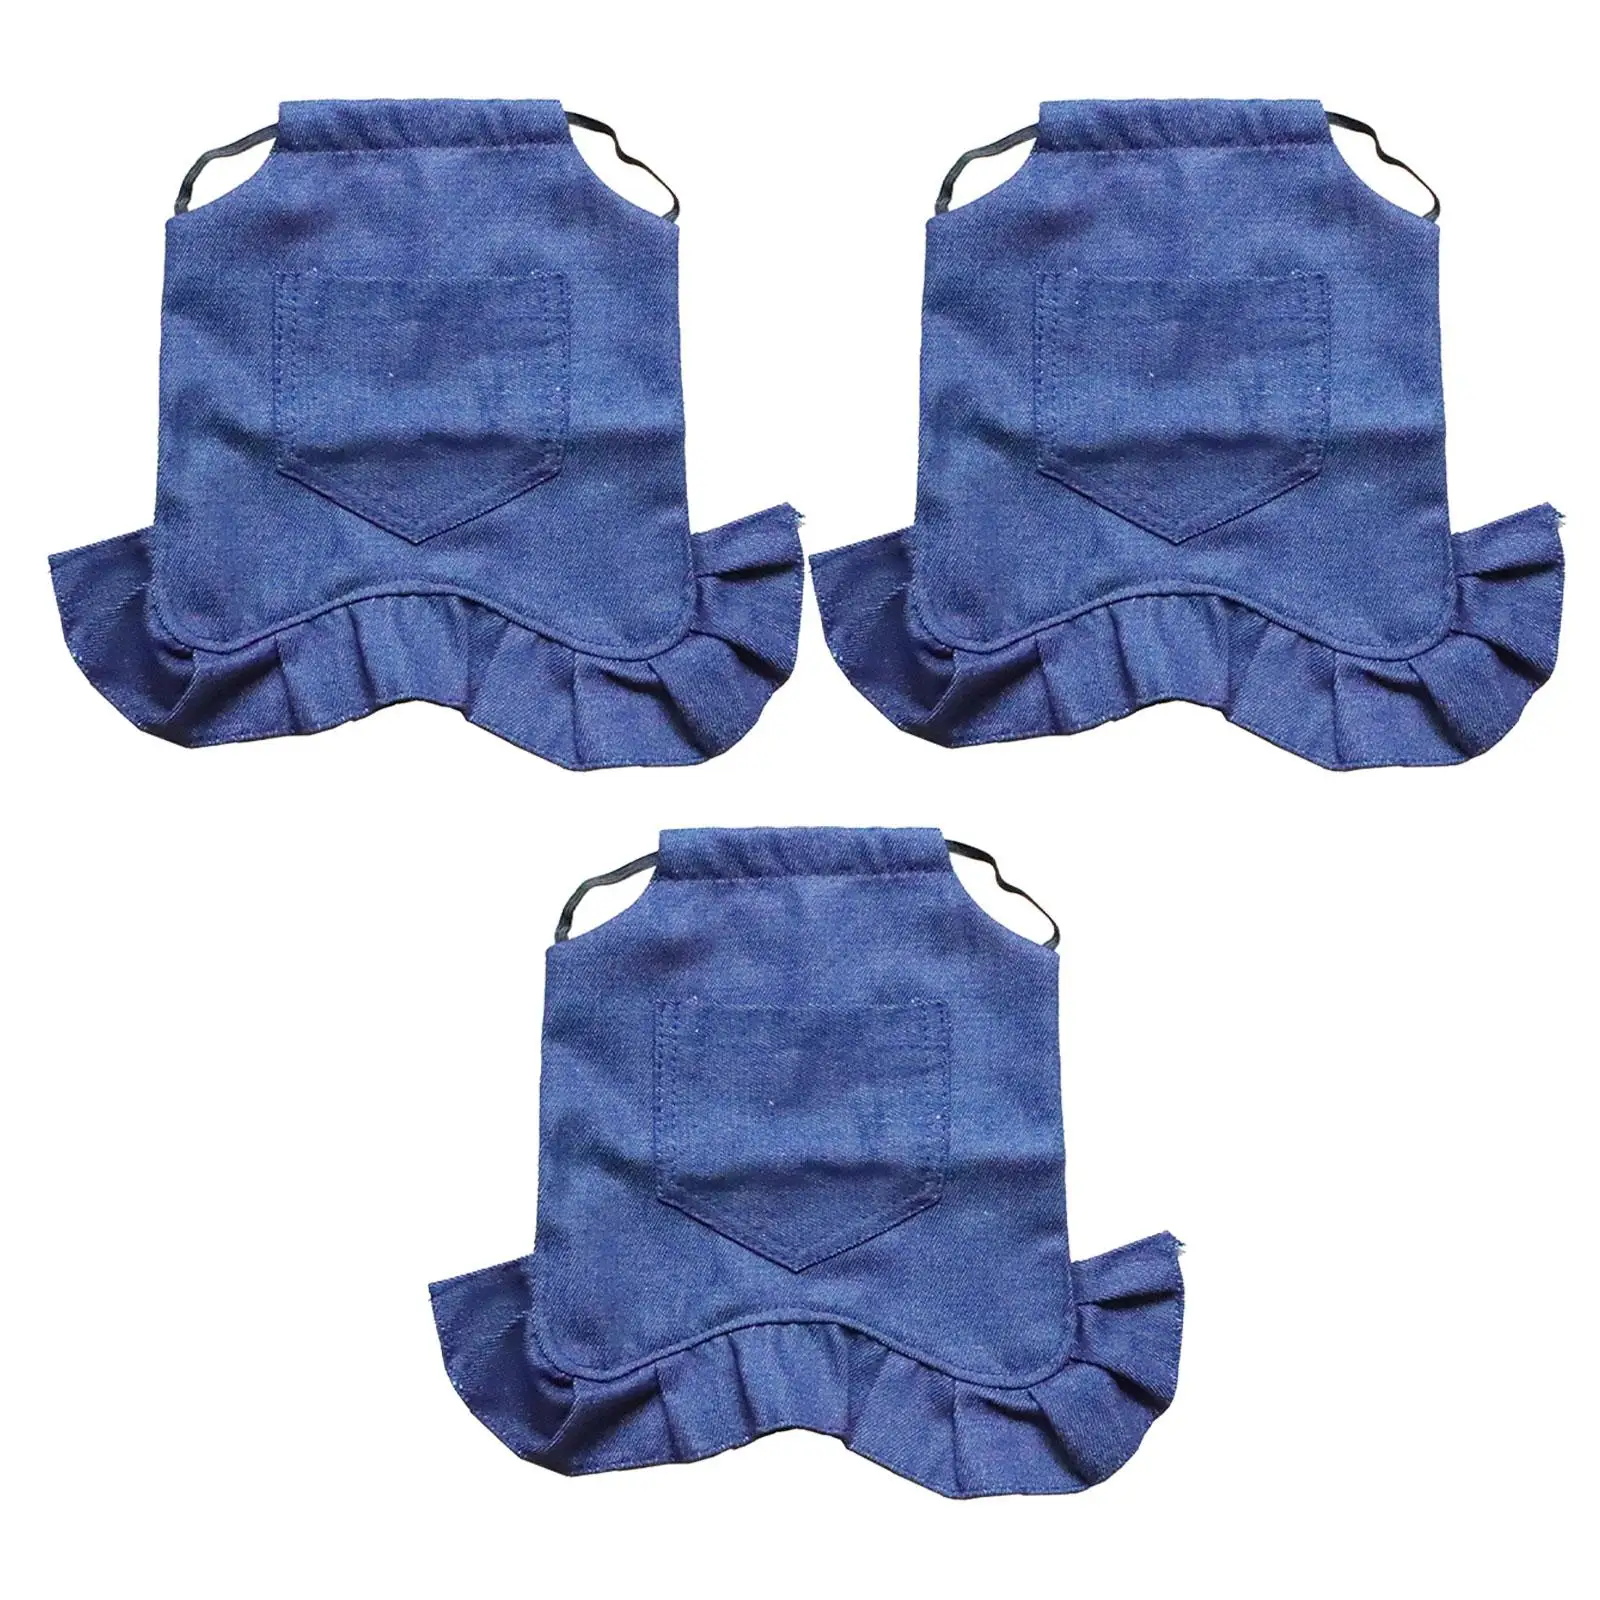 3x Chicken Saddle Hens Durable with Pocket Poultry Saver Feather Protection Jackets Pet Poultry Supplies Pet Clothes Hen Apron